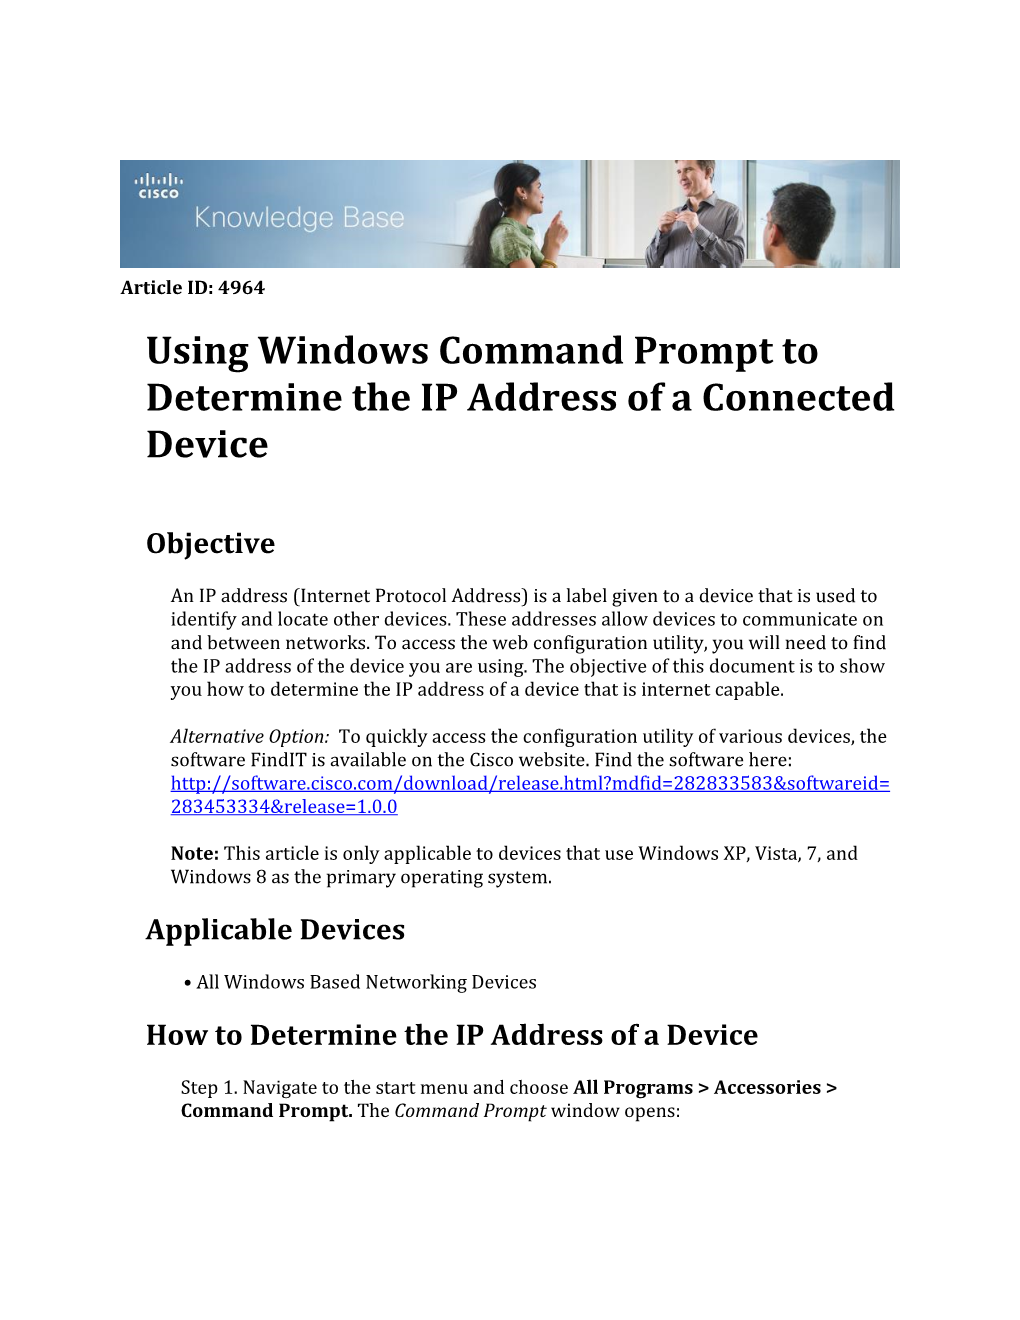 Using Windows Command Prompt to Determine the IP Address of a Connected Device